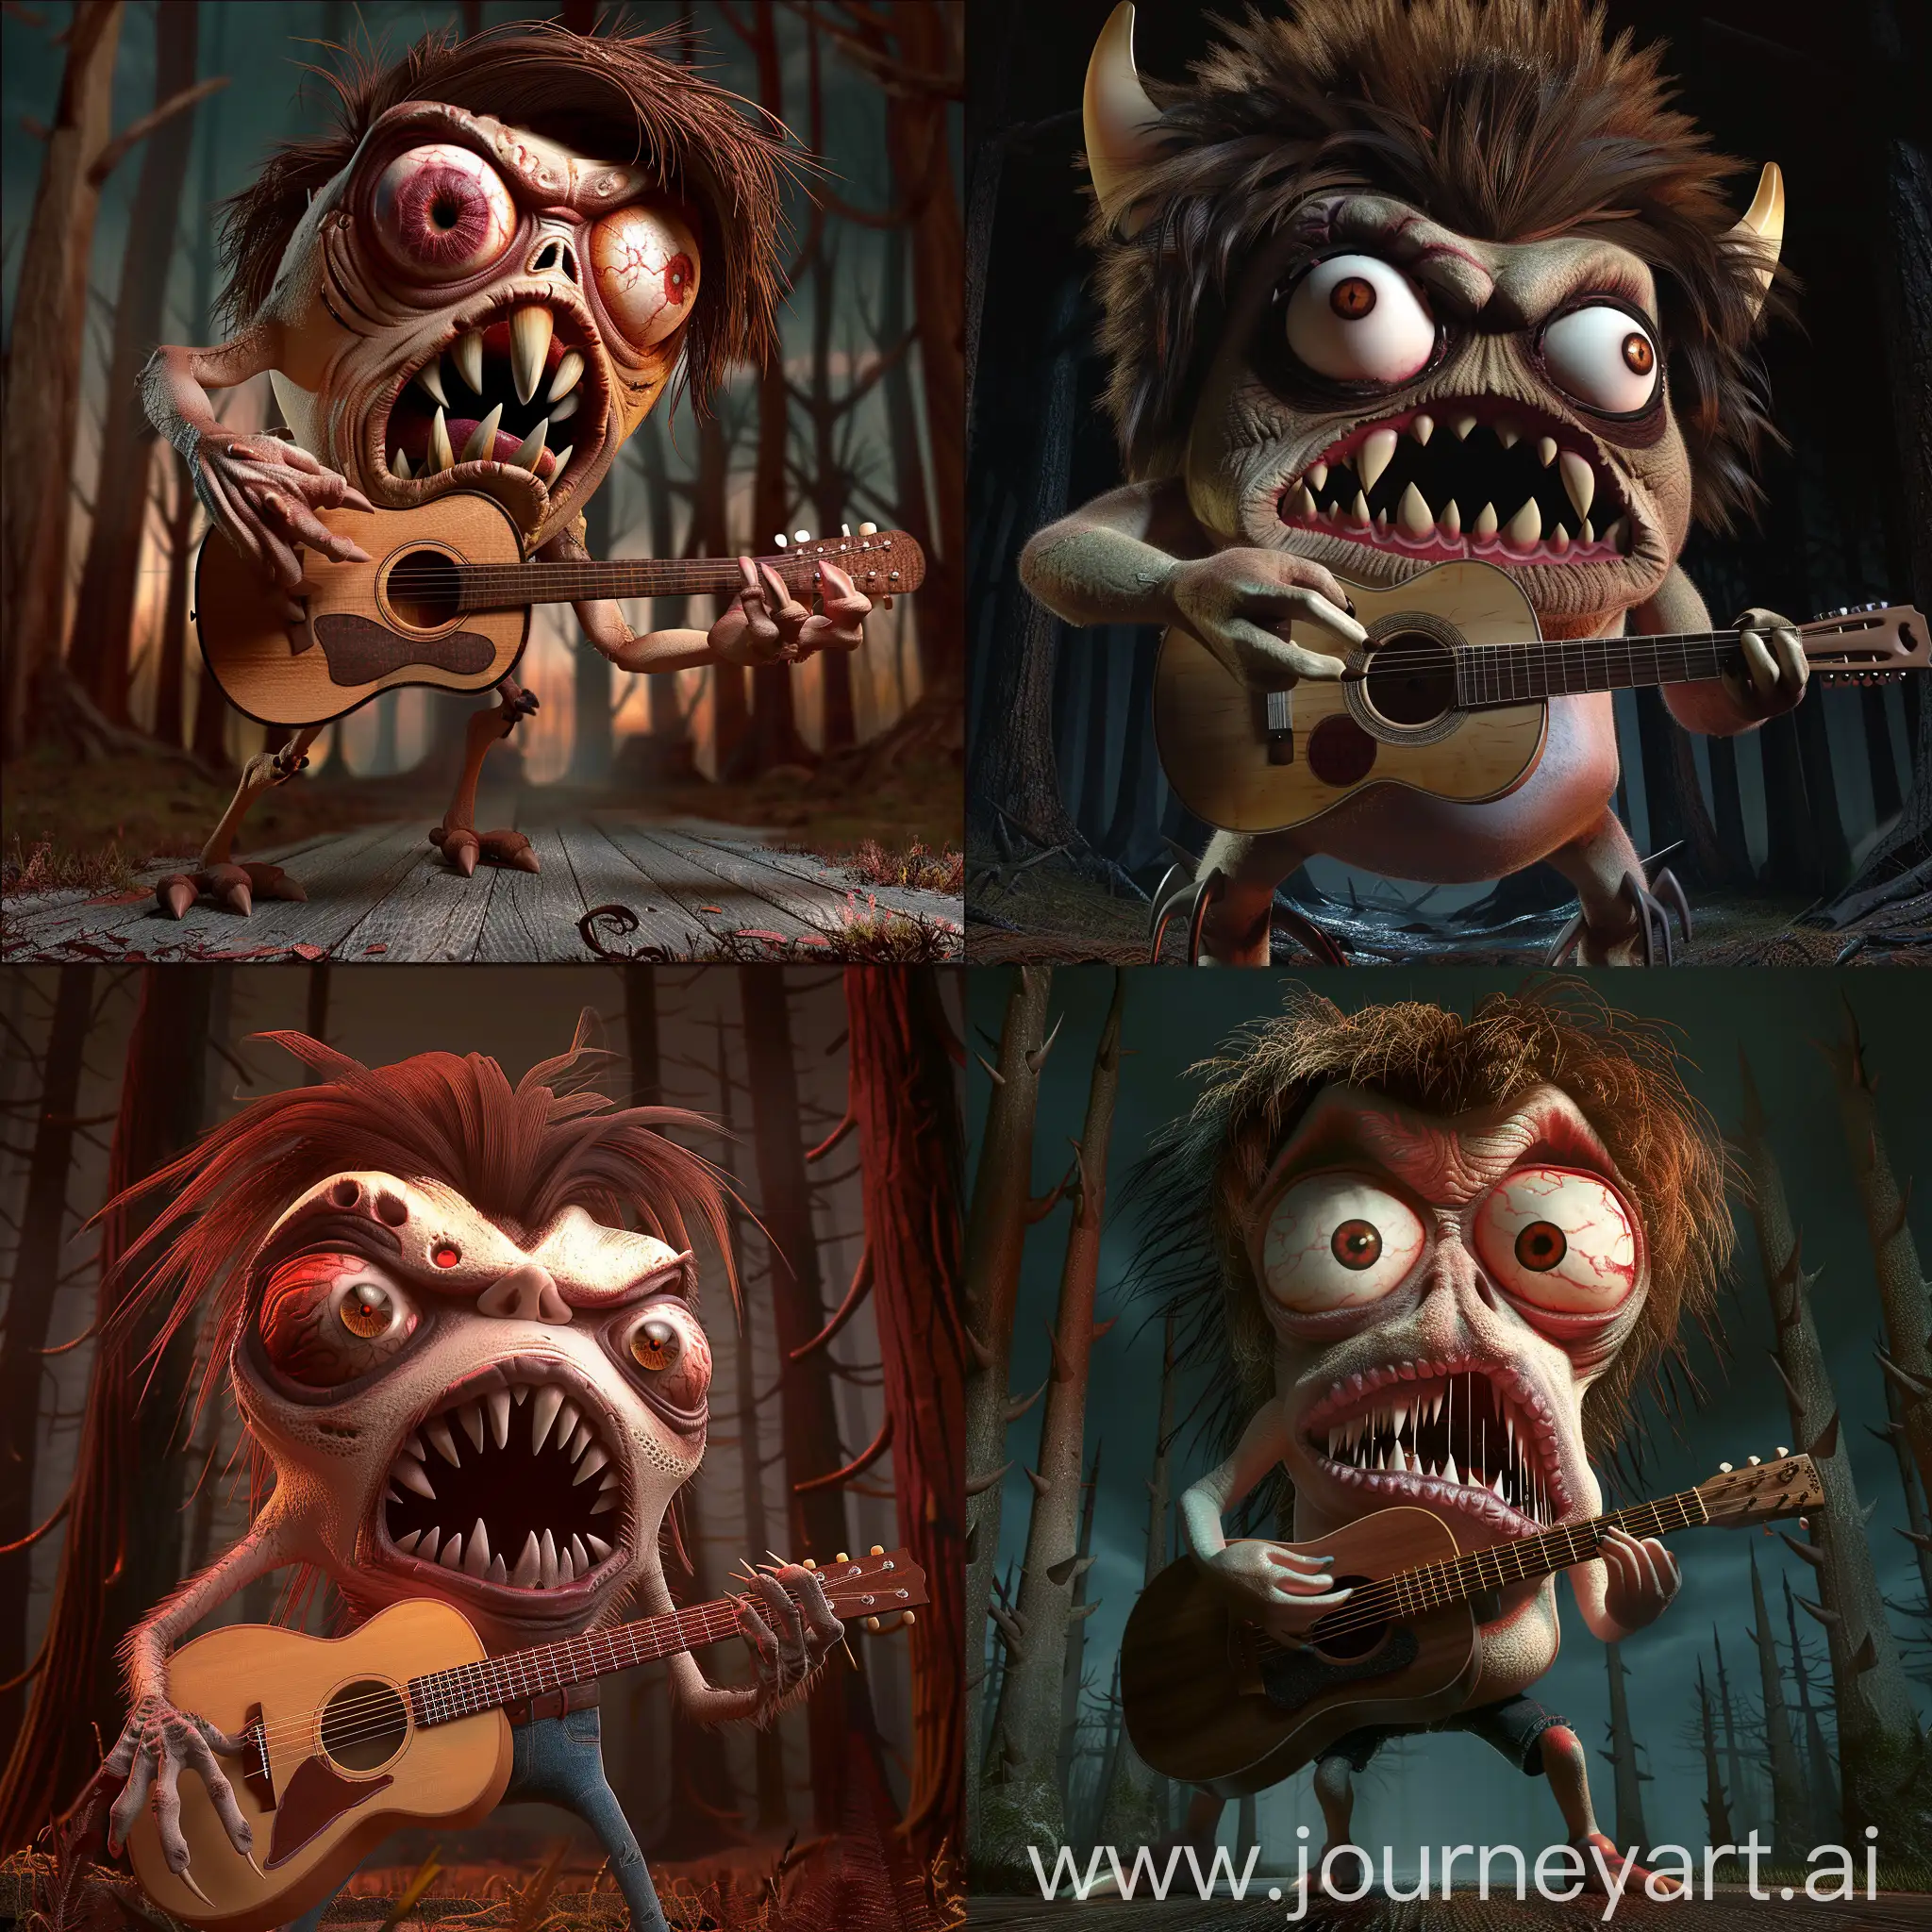 Straight on:1.5 Generate scary Mapinguari images in 3D, with a dark forest in the background. He has one eye only. In his hands, he plays a acoustic guitar. His mouth is open. Mapinguari's cyclops eye should have a red background and brown hair. His teeth are sharp and there is an angry expression on his face. Its body is gigantic, with broad shoulders and strong arms, with sharp claws on its hands. In his hands, Mapinguari holds a classical guitar.The legs are thinner and shorter.